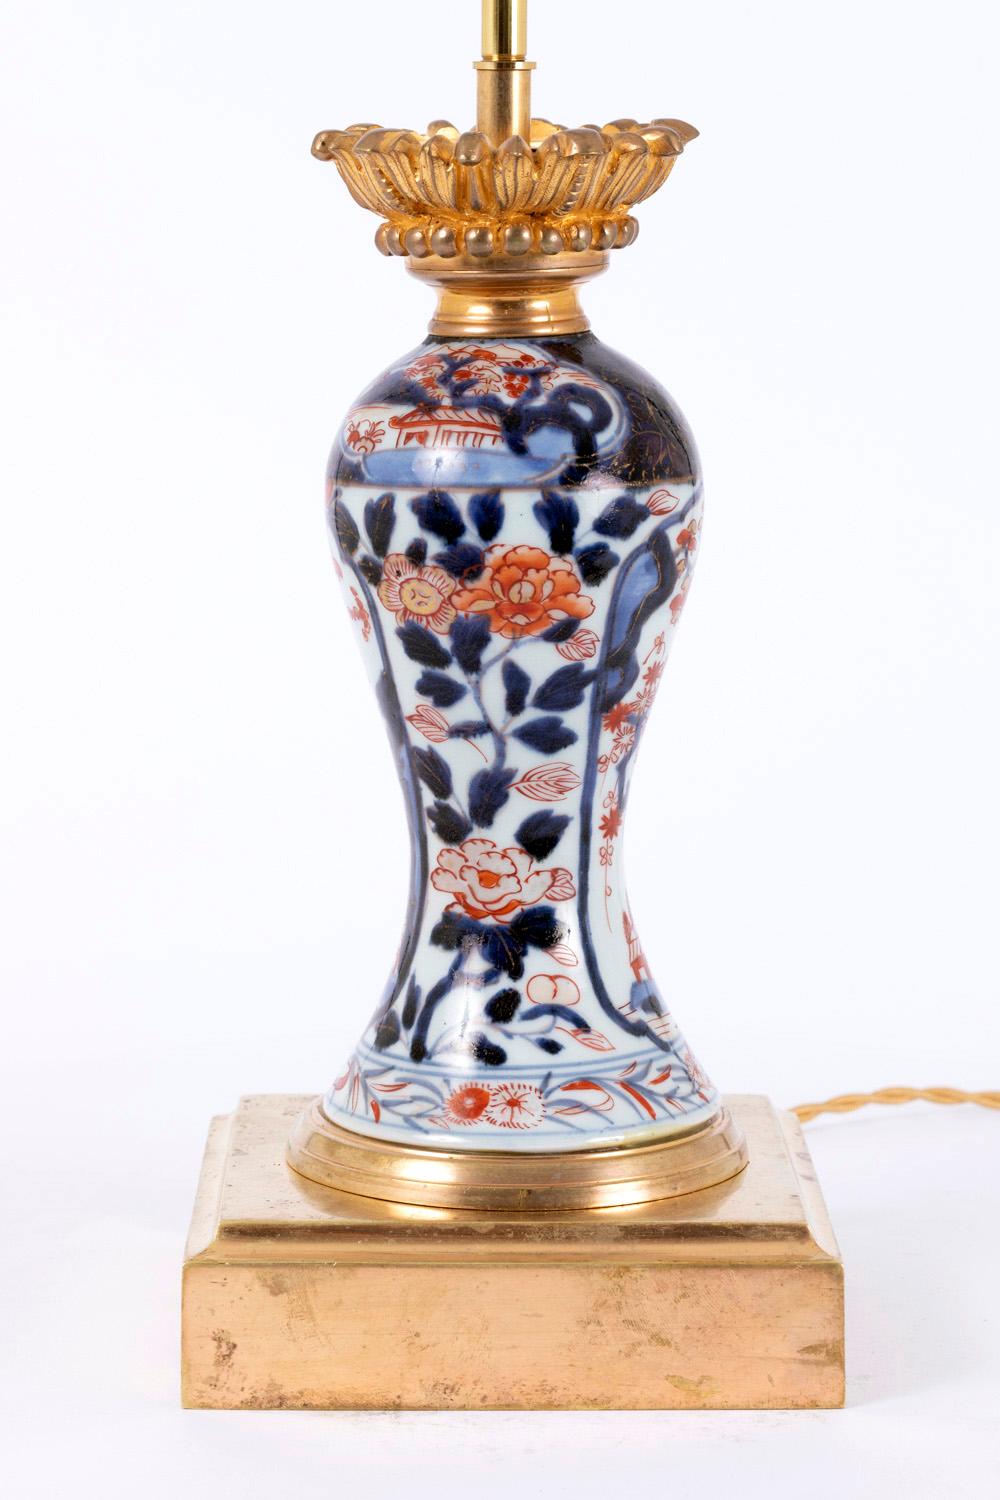 Gilt Pair of Porcelain Lamps with Imari Decor, Late 19th Century For Sale